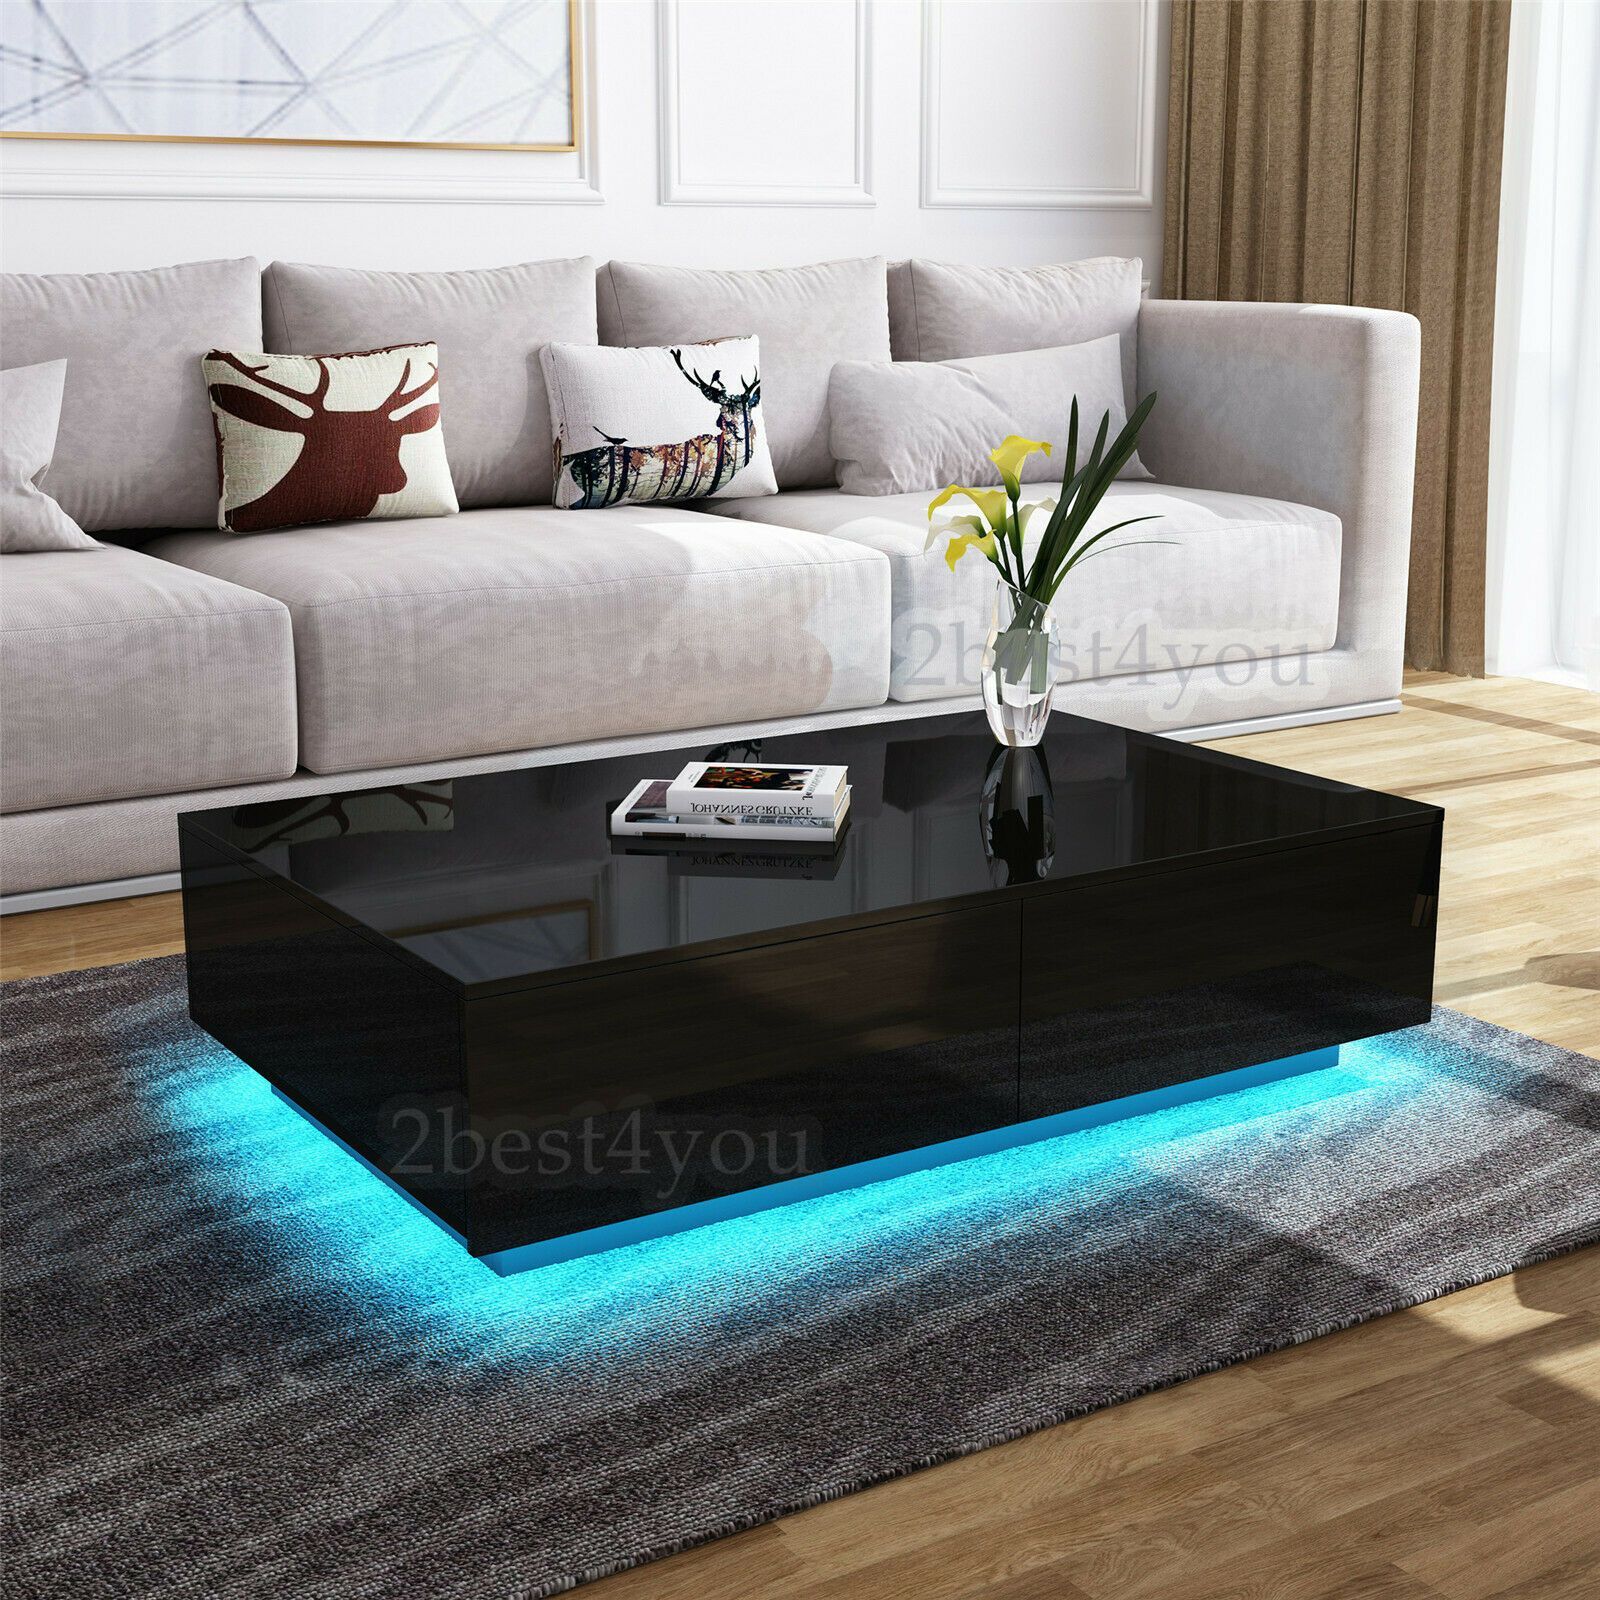 Modern Coffee Table With Led Lights – Stellabracy In Rectangular Led Coffee Tables (View 9 of 20)